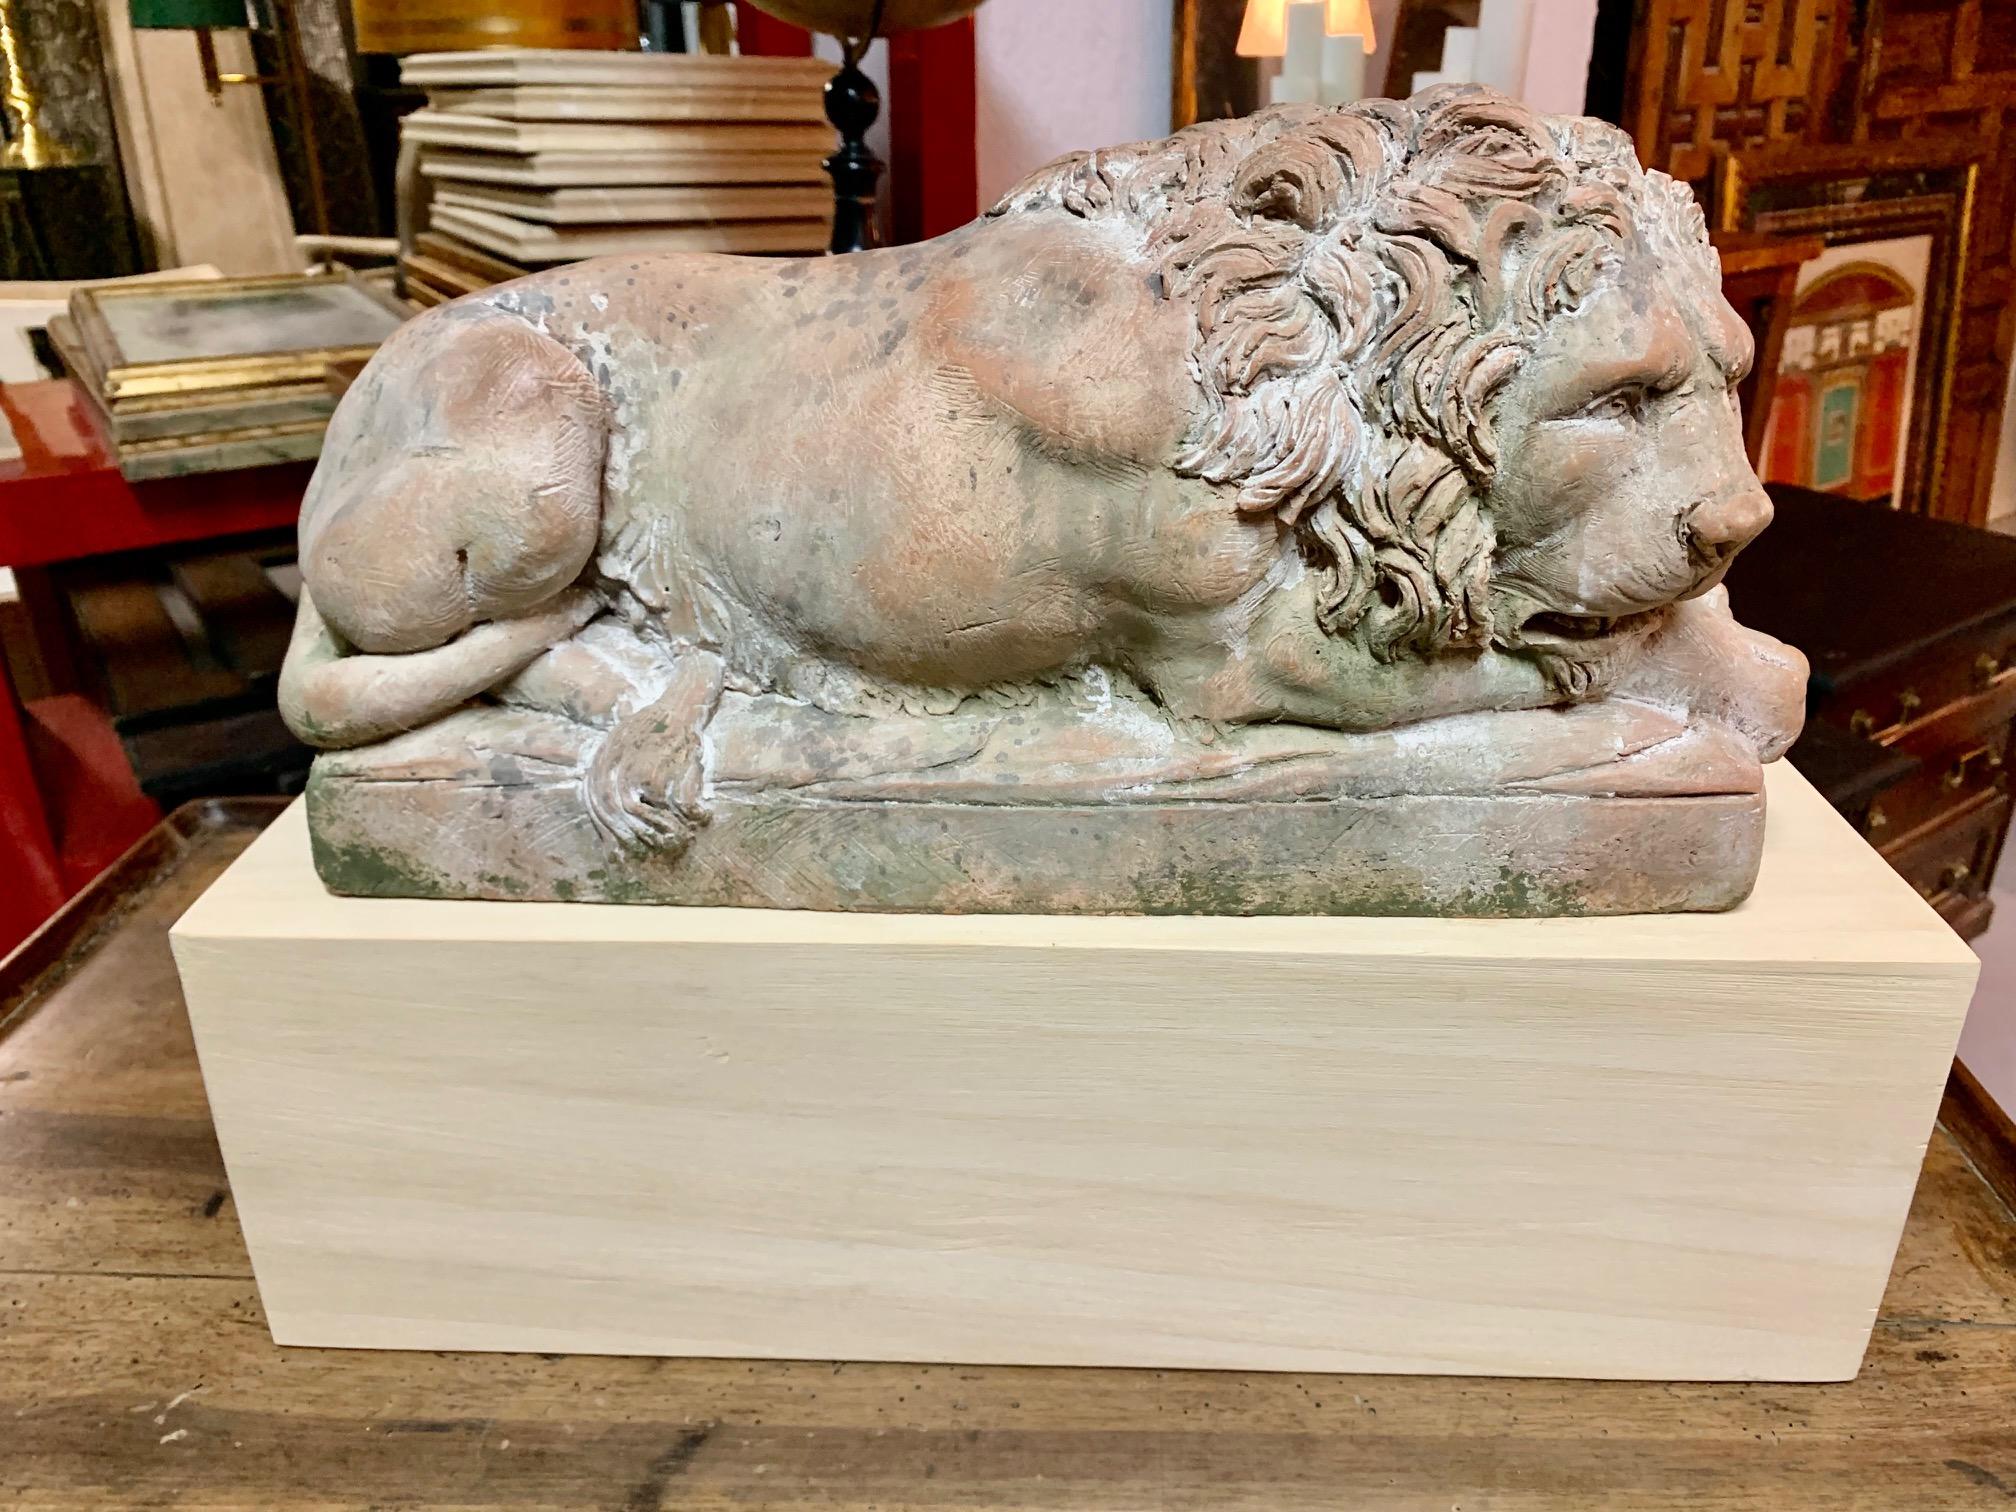 A beautiful Italian terracotta sculpture, representing a lying lion, may represent a reproduction of the famous monument The Wounded Lion, in Lucerne.